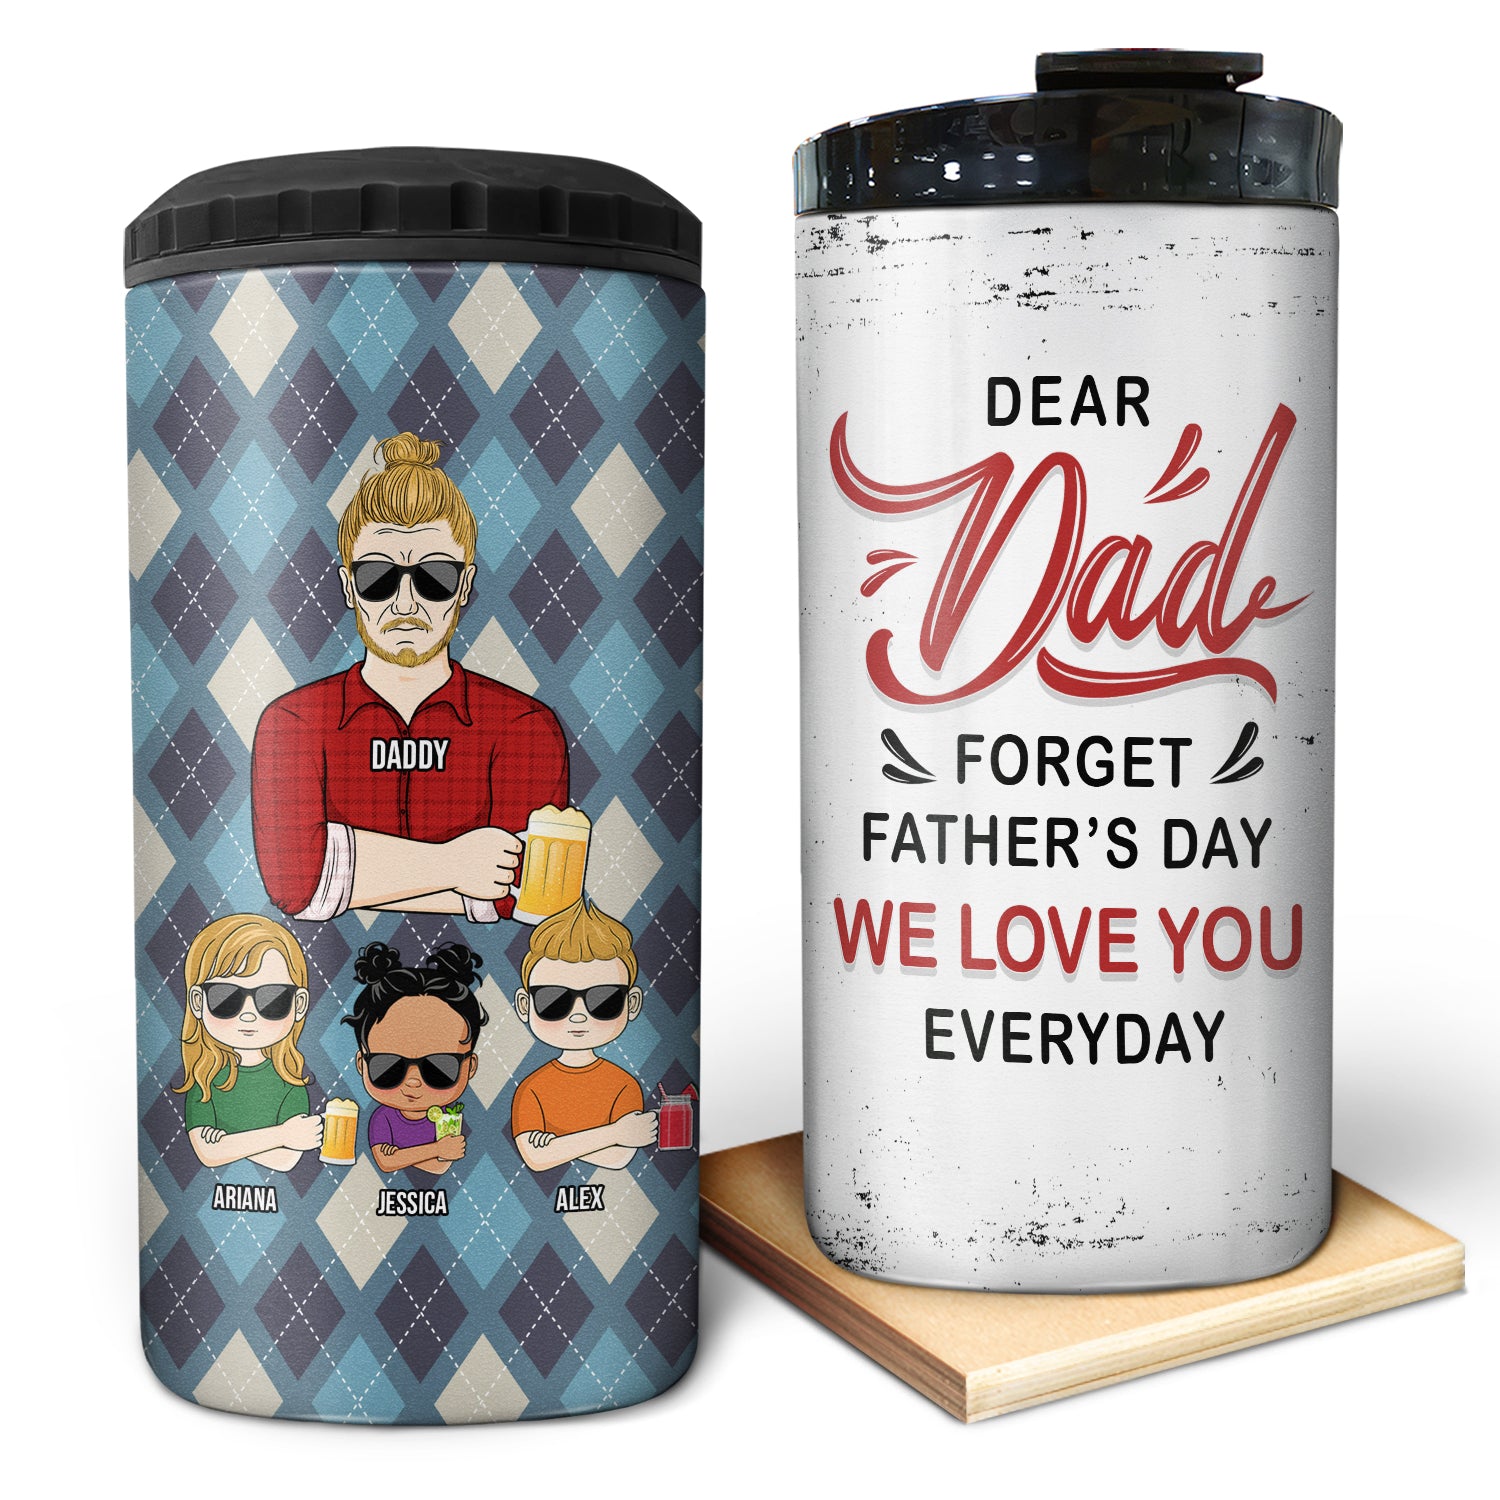 We Love You Everyday - Gift For Father - Personalized Custom 4 In 1 Can Cooler Tumbler